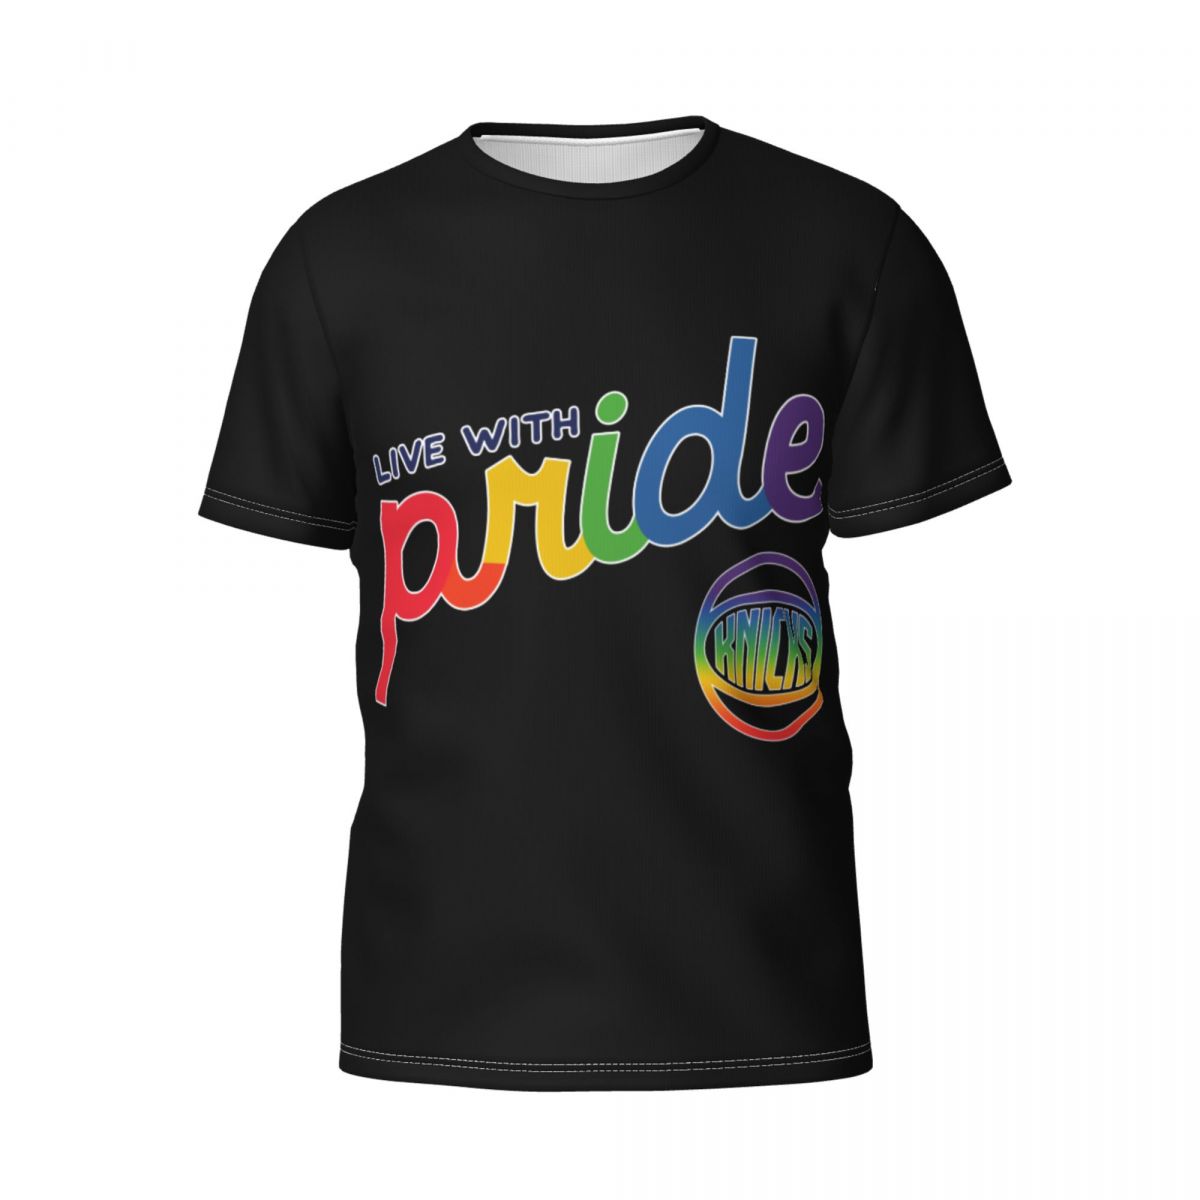 New York Knicks Live With Pride Men's T-Shirt